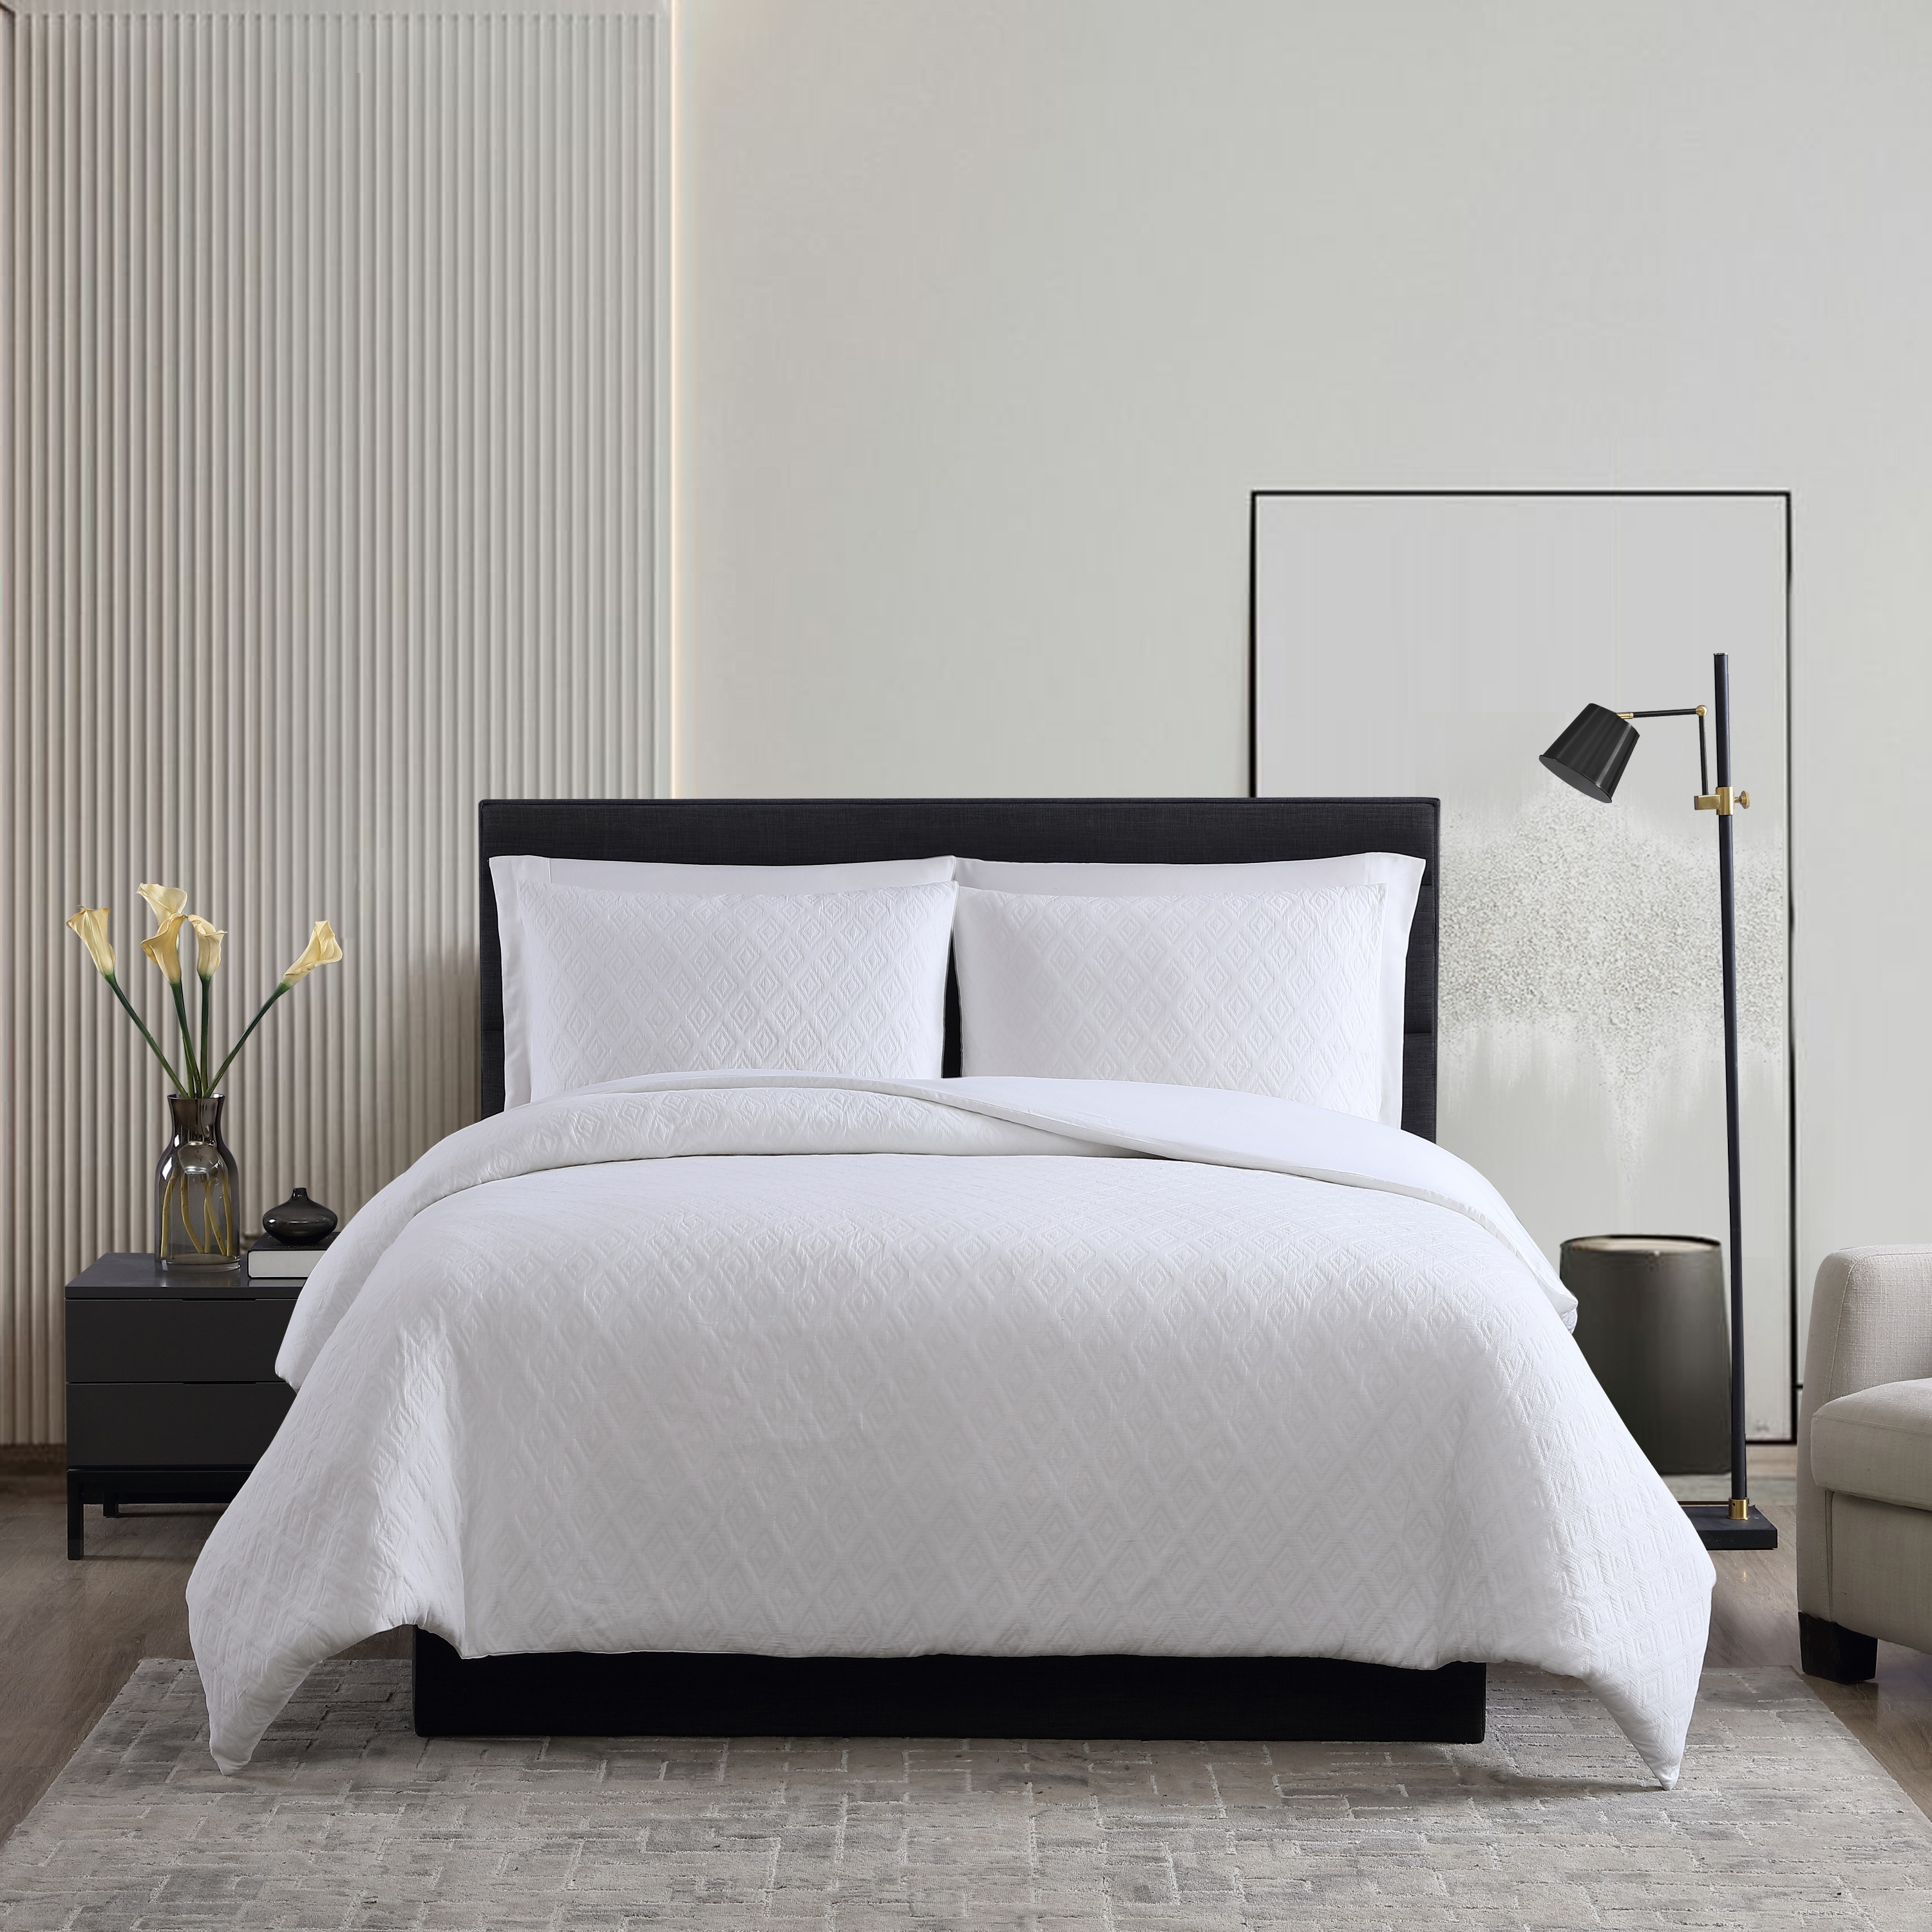 https://ak1.ostkcdn.com/images/products/is/images/direct/712aa15a8487b7f0ebe4914101bc83c3c145a283/Vera-Wang-Double-Diamond-Matelasse-White-Duvet-Cover-Set.jpg